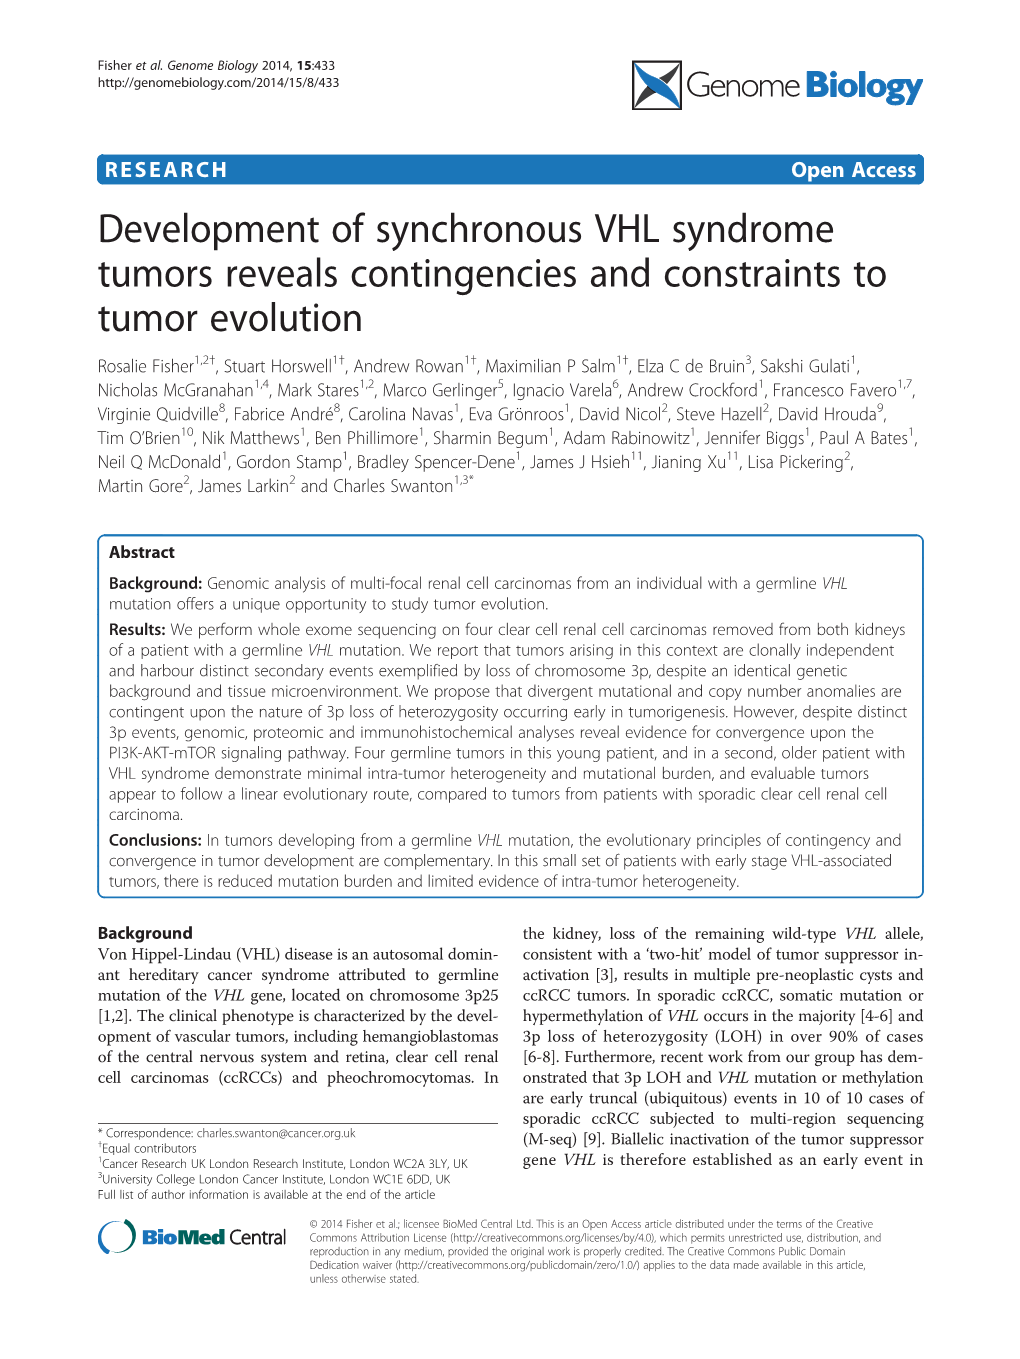 Development of Synchronous VHL Syndrome Tumors Reveals Contingencies and Constraints to Tumor Evolution